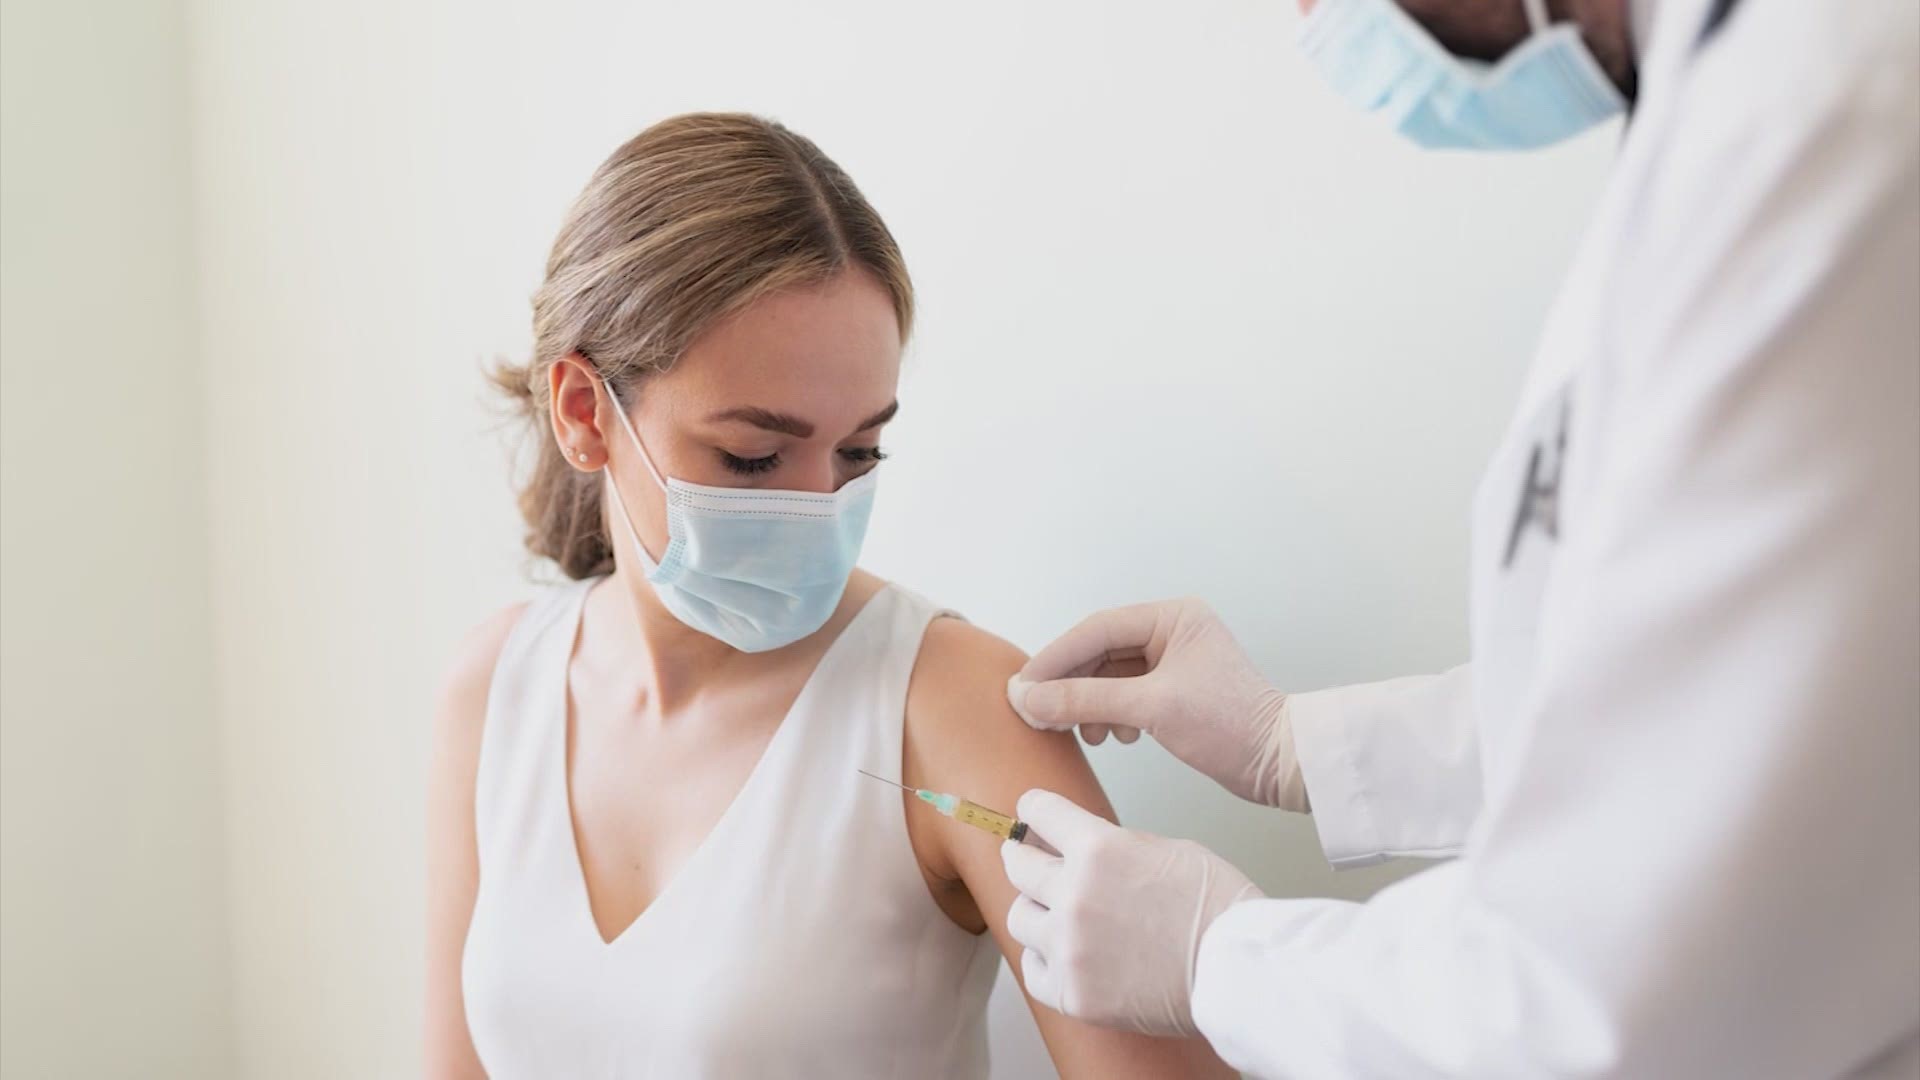 Every adult in Texas becomes eligible to get the COVID-19 vaccine on March 29, 2021.